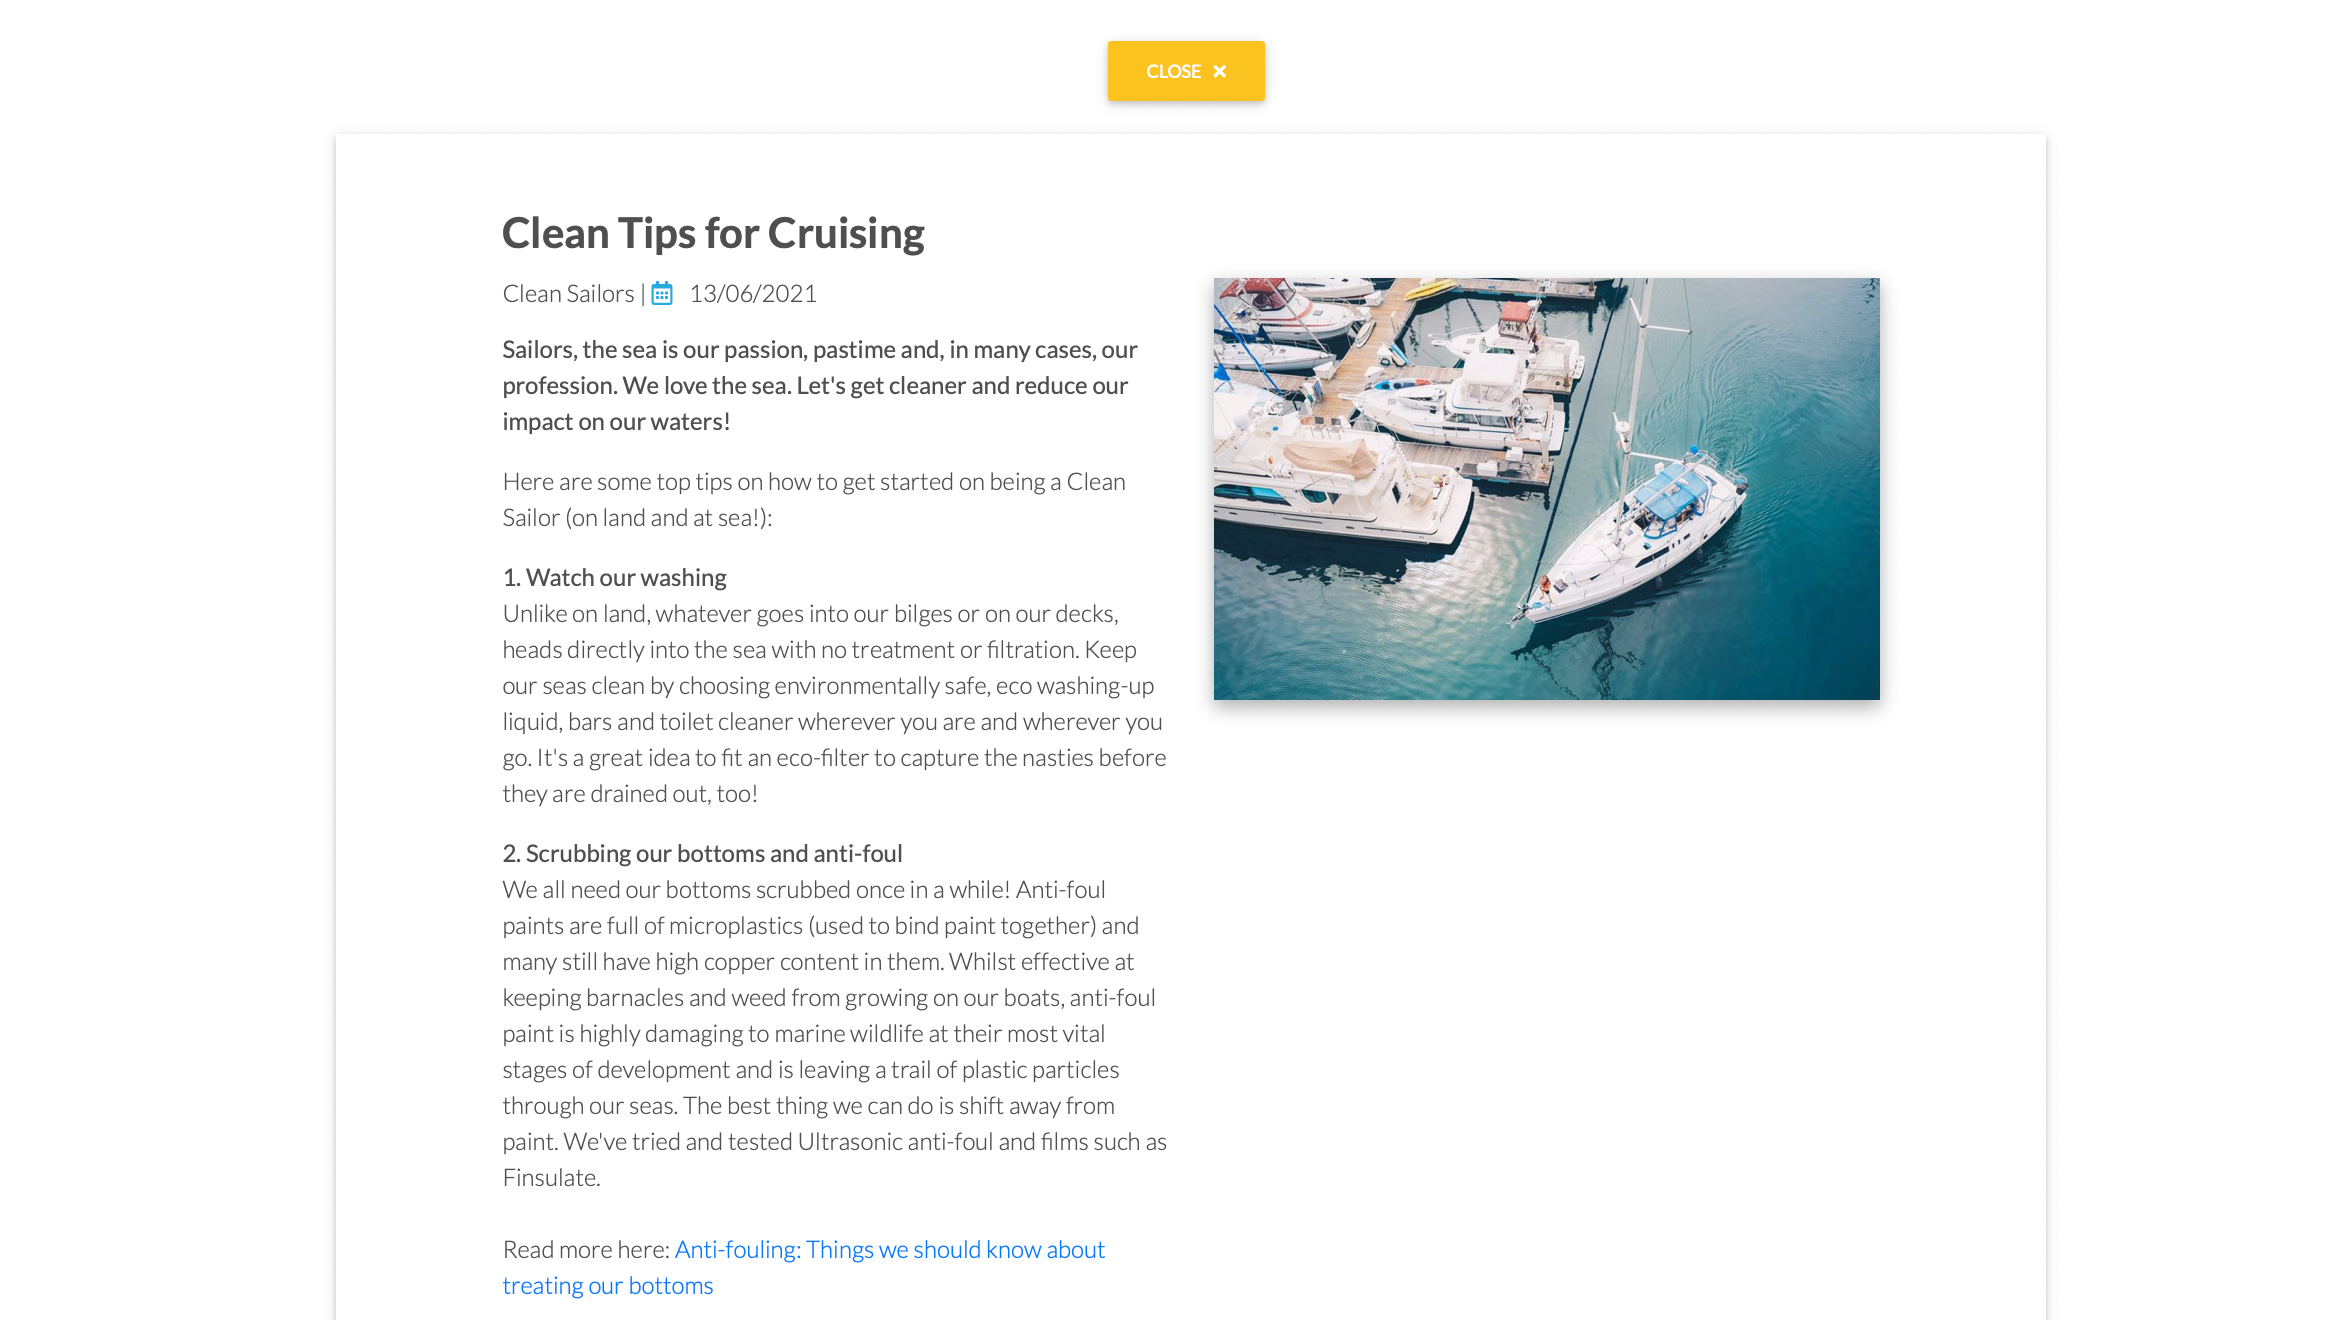 Our Clean Tips for Cruising featured by Ocean Cruising Club